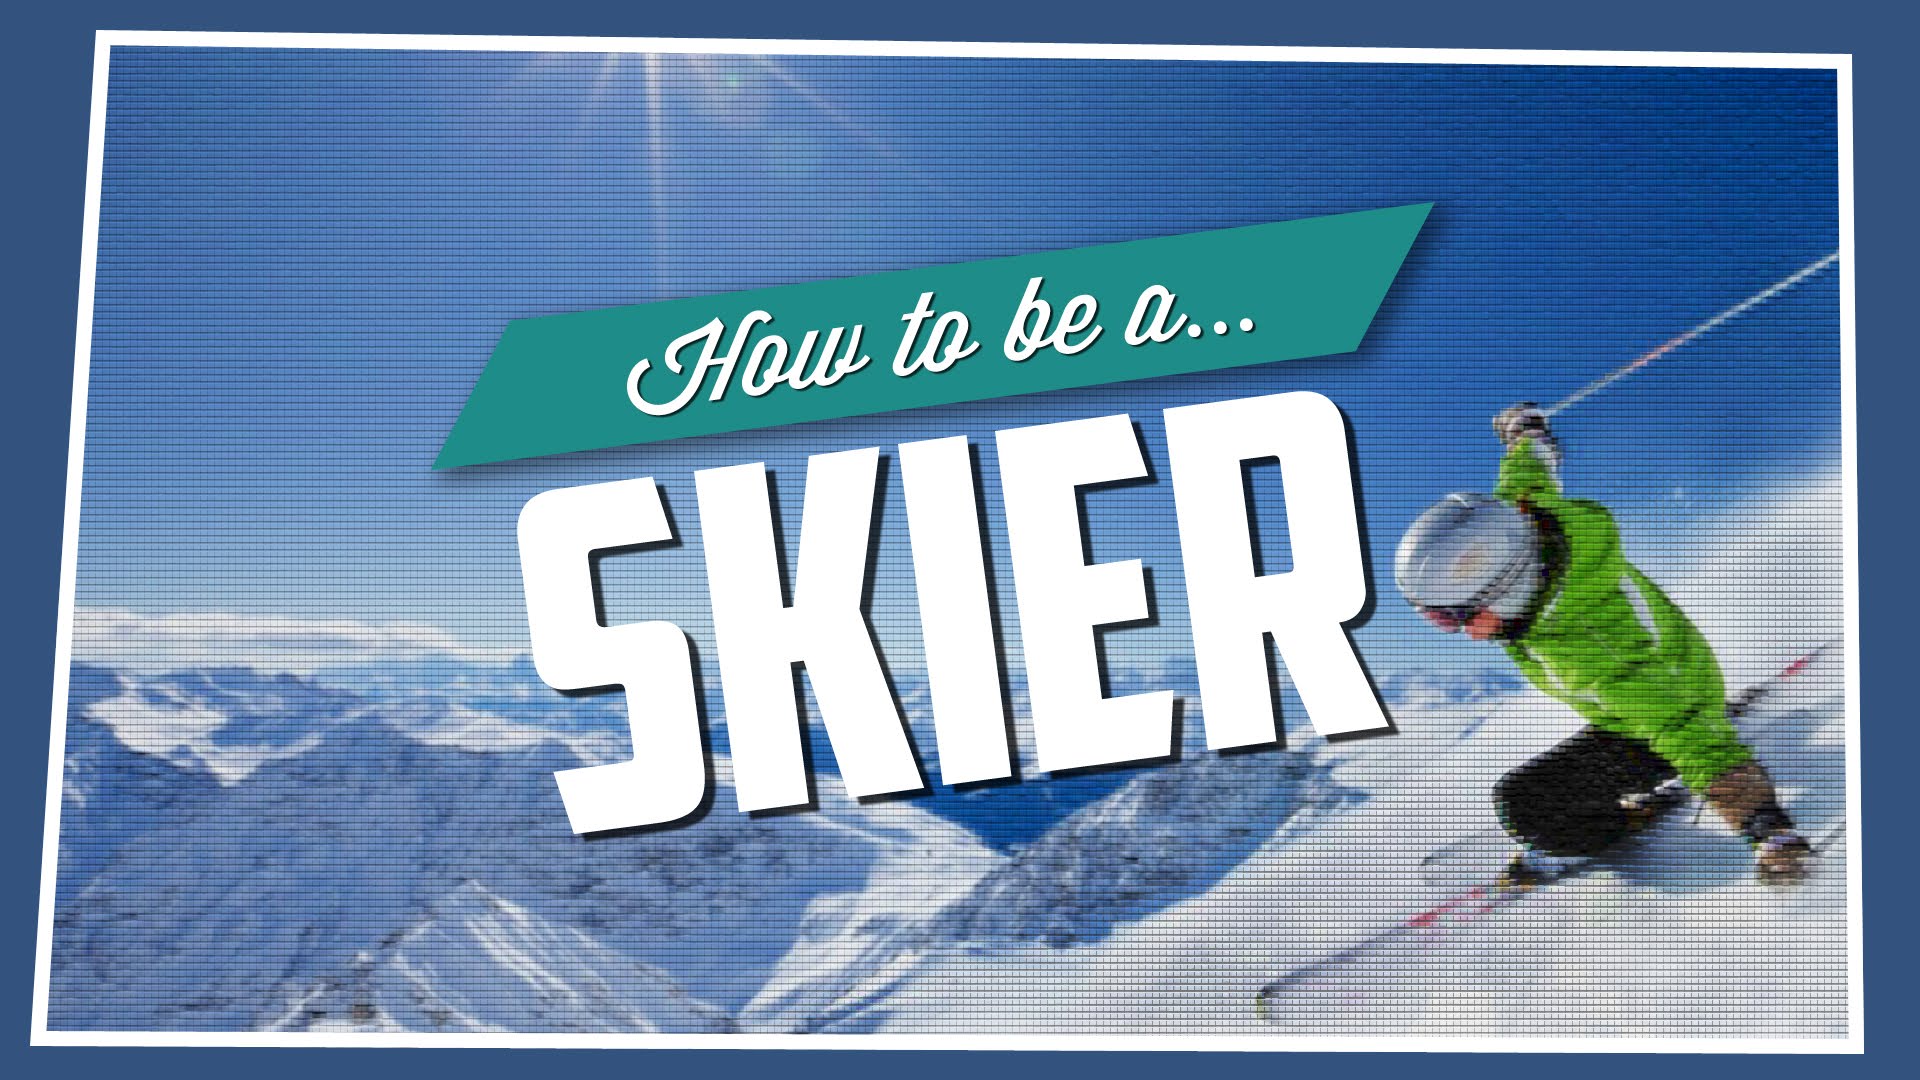 How To Be A Skier - YouTube